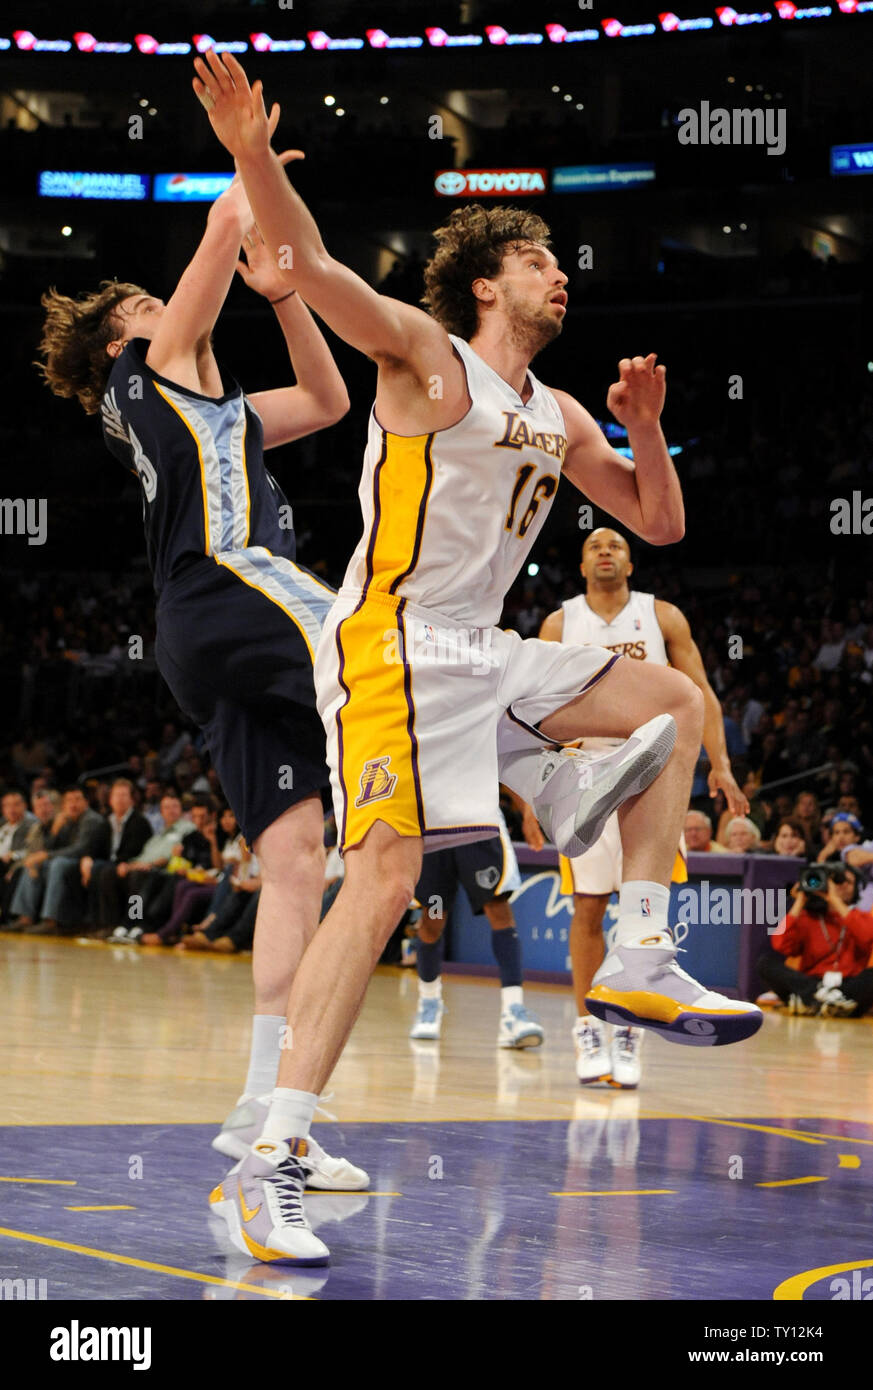 Los Angeles Lakers center Pau Gasol (16) of Spain, and his brother and  Memphis Grizzlies center Marc Gasol (33) jockey for position during the  first half of an NBA basketball game in